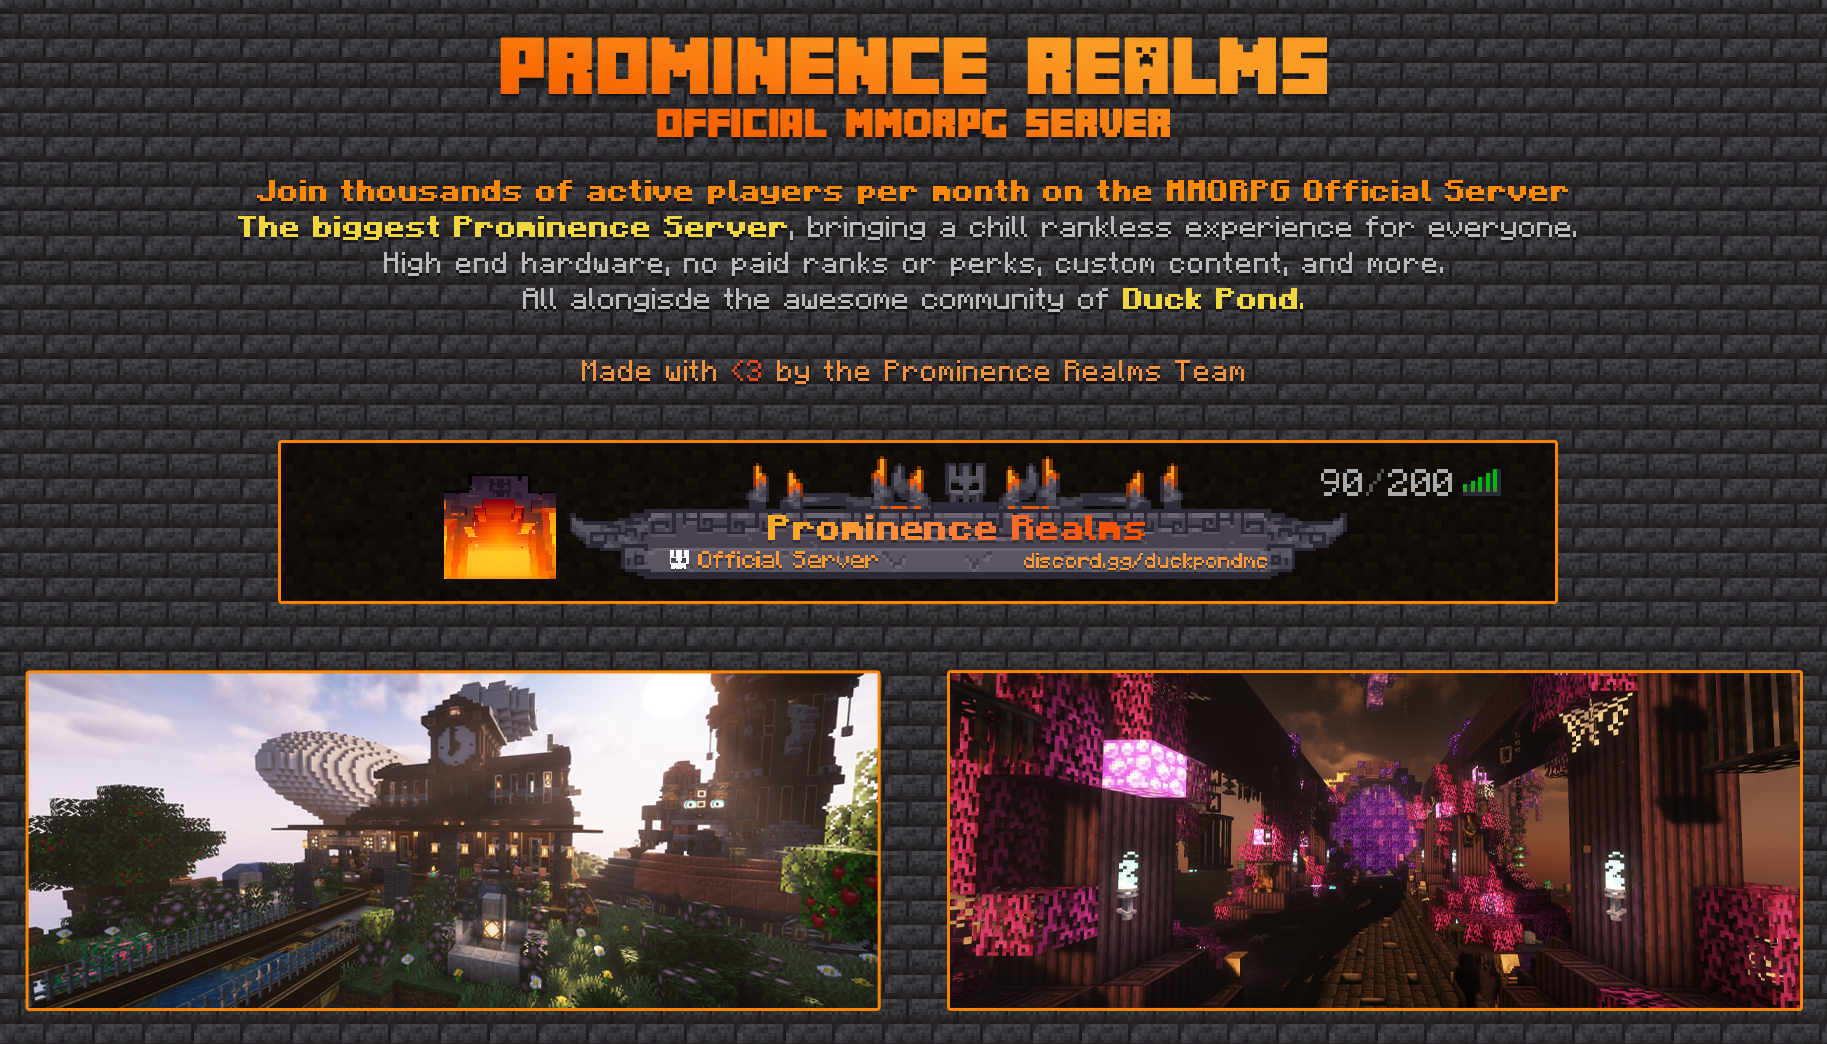 Join thousands of players in the official server: Prominence Realms. Featuring a chill, rankless MMORPG experience that you can invite all of your friends to play over.